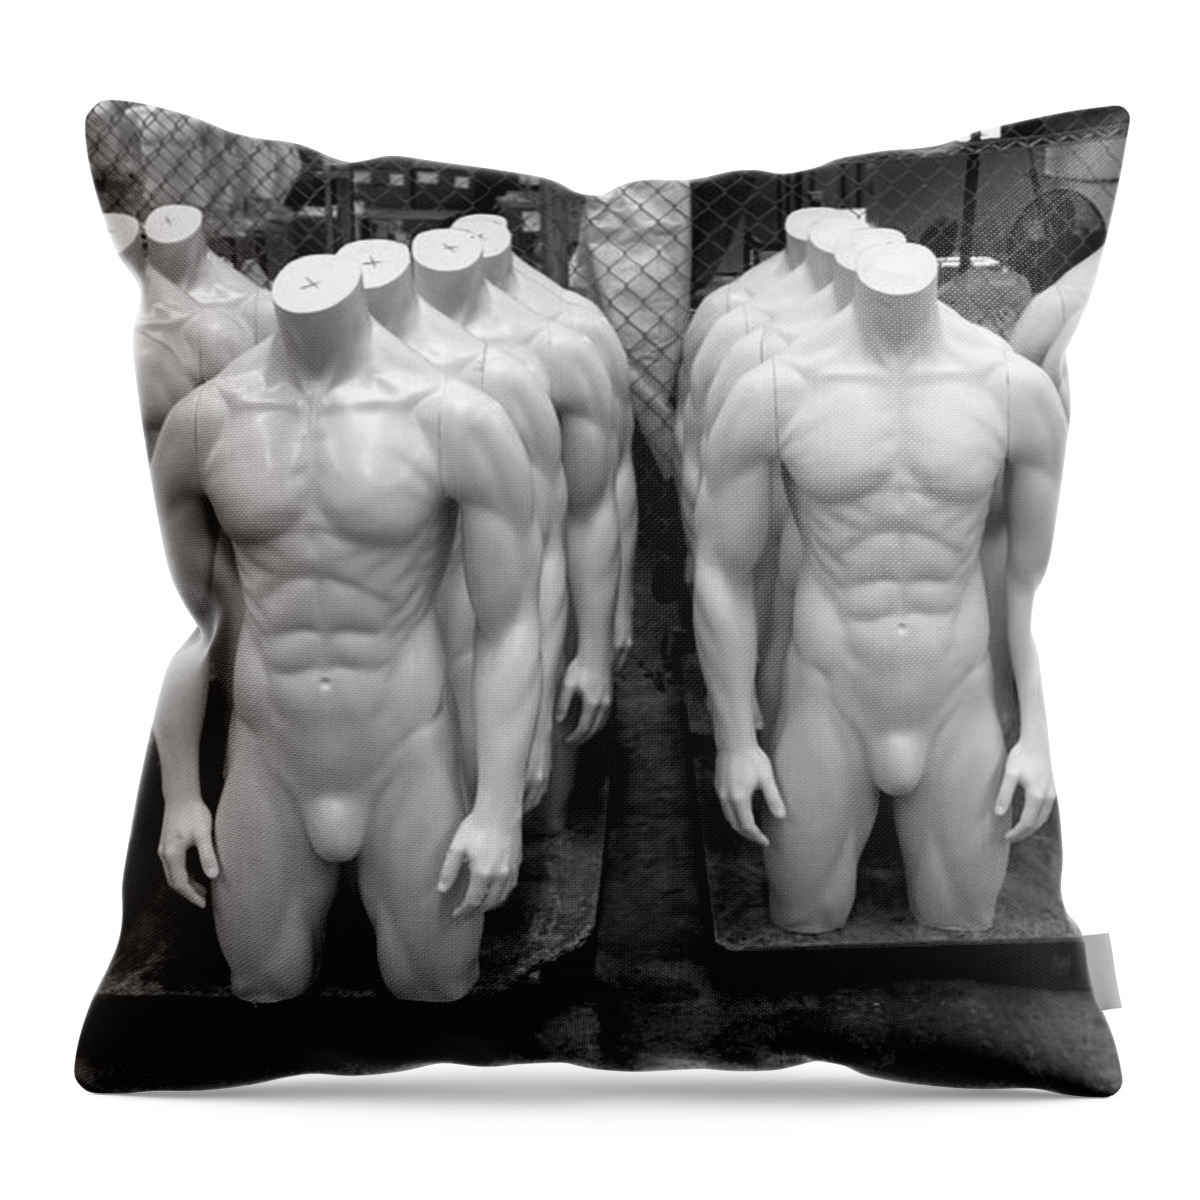 Men Throw Pillow featuring the photograph Male Mannequins by Rick Wilking